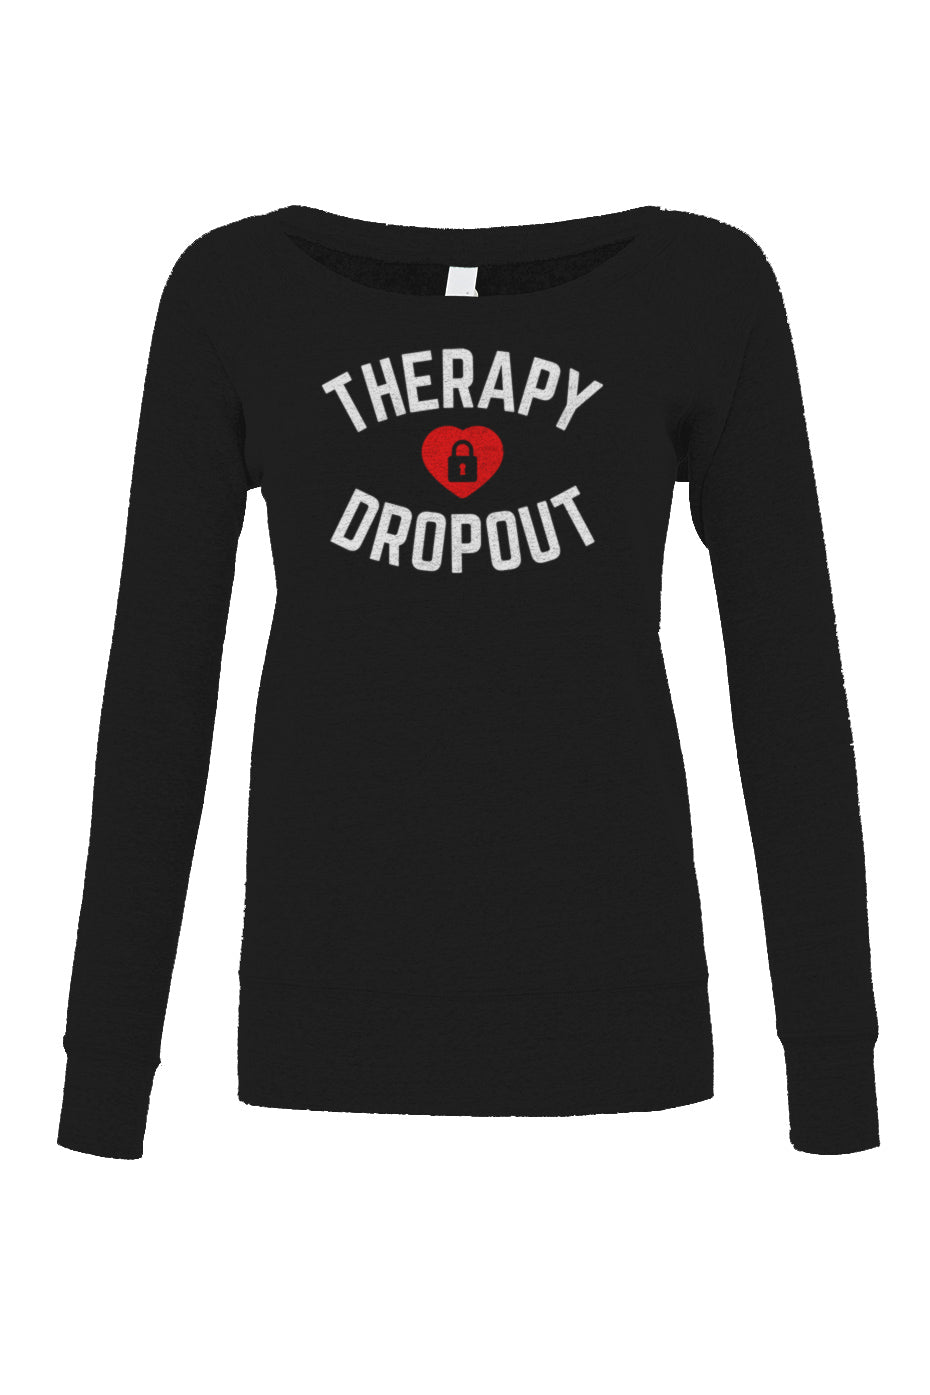 Women's Therapy Dropout Scoop Neck Fleece